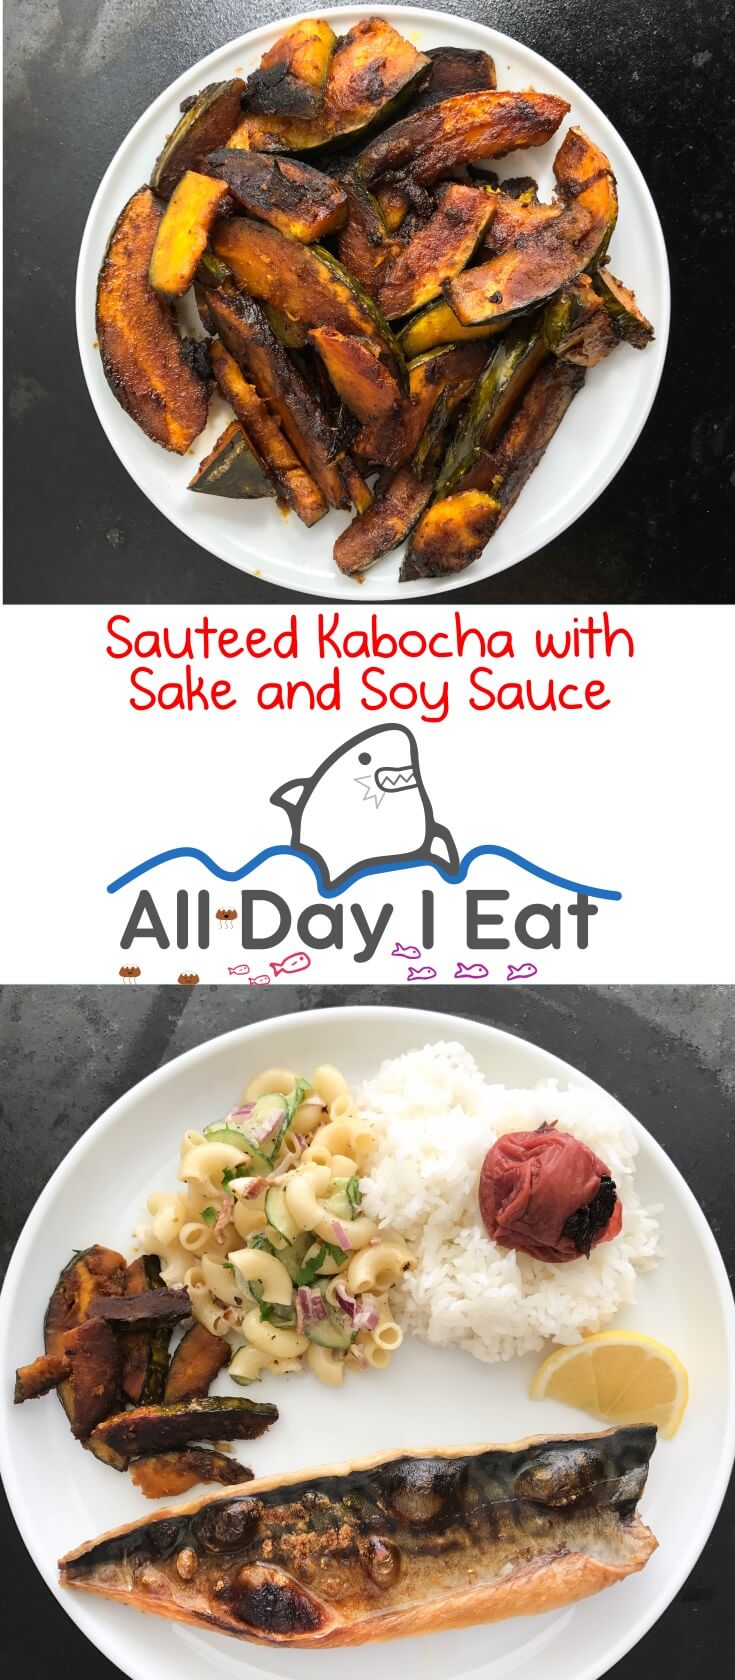 Sauteed Kabocha with Sake and Soy Sauce. Japanese pumpkin that is easy to prepare and tastes delicious! | www.alldayieat.com